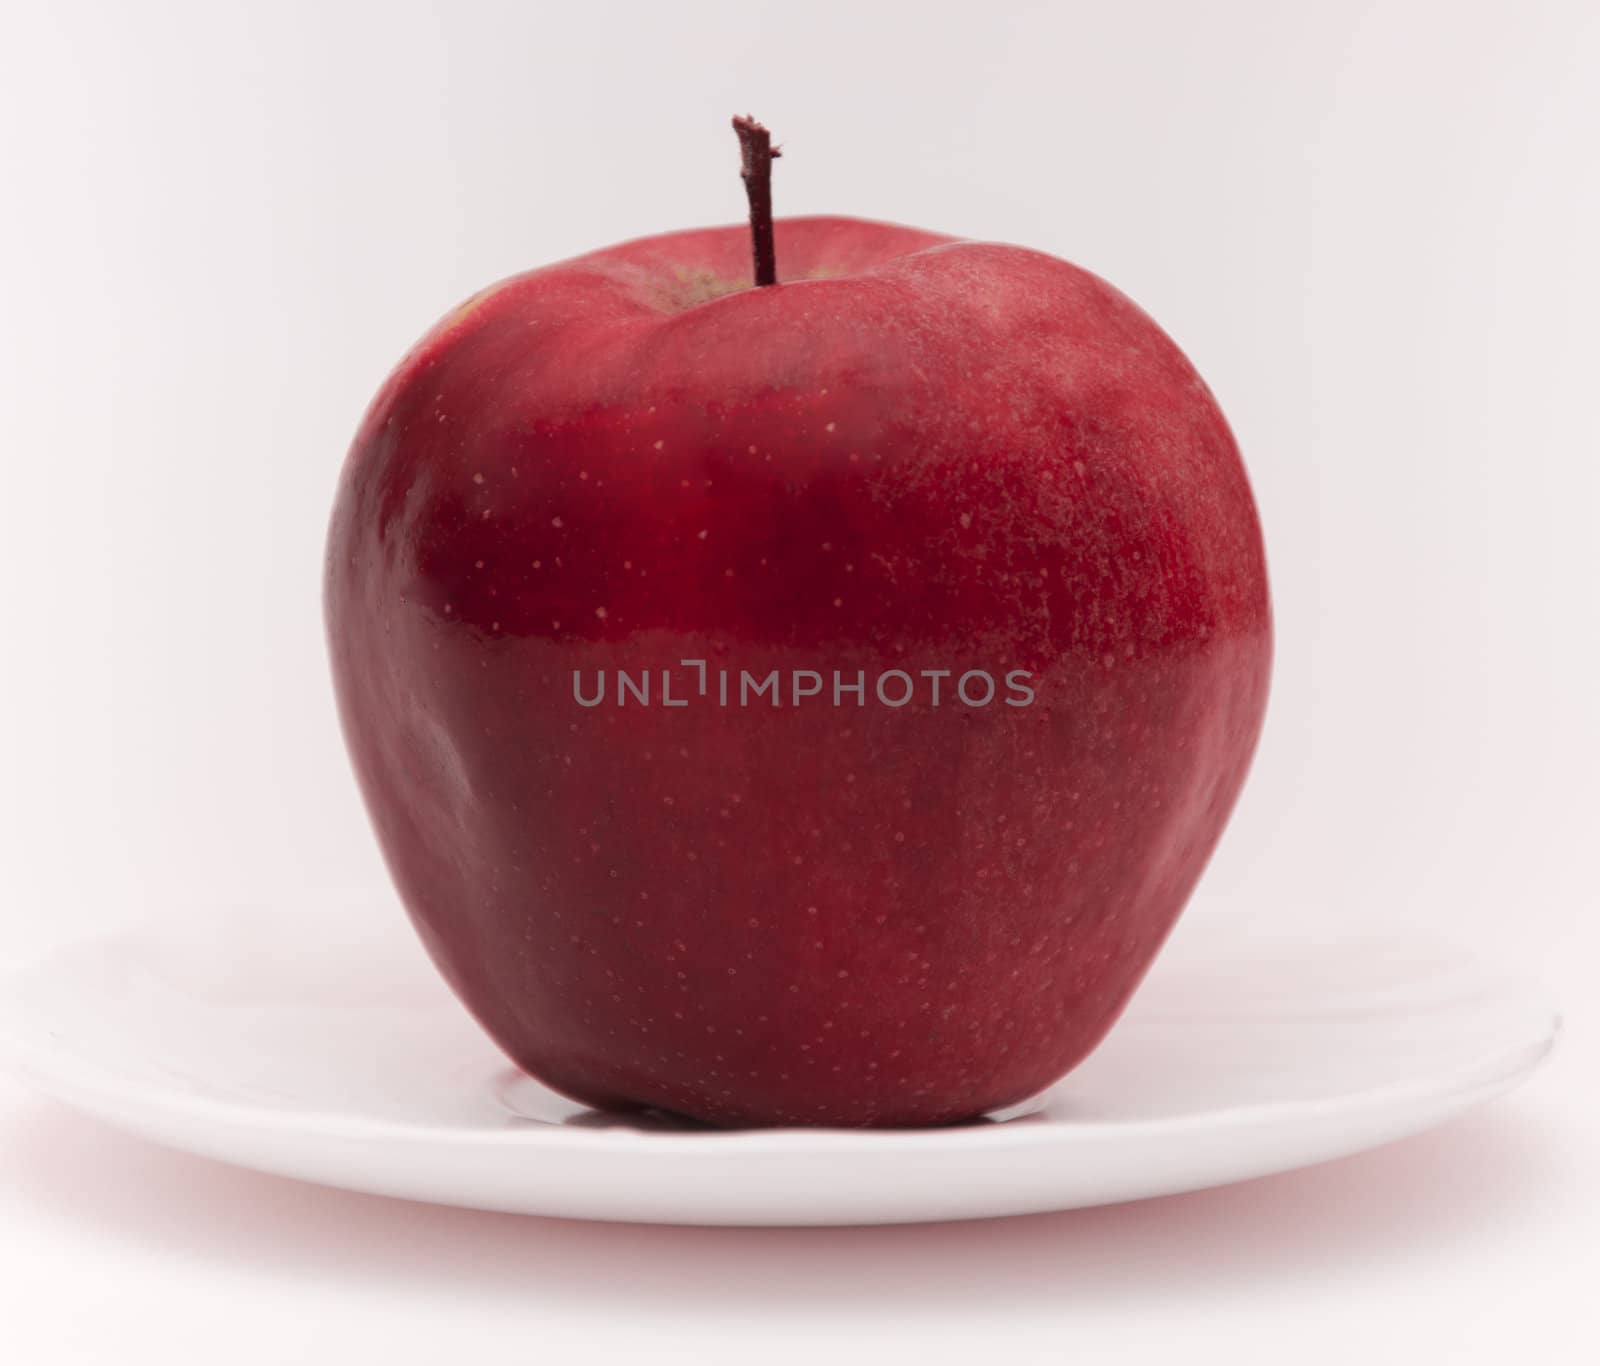 The isolated Red apple on white saucer